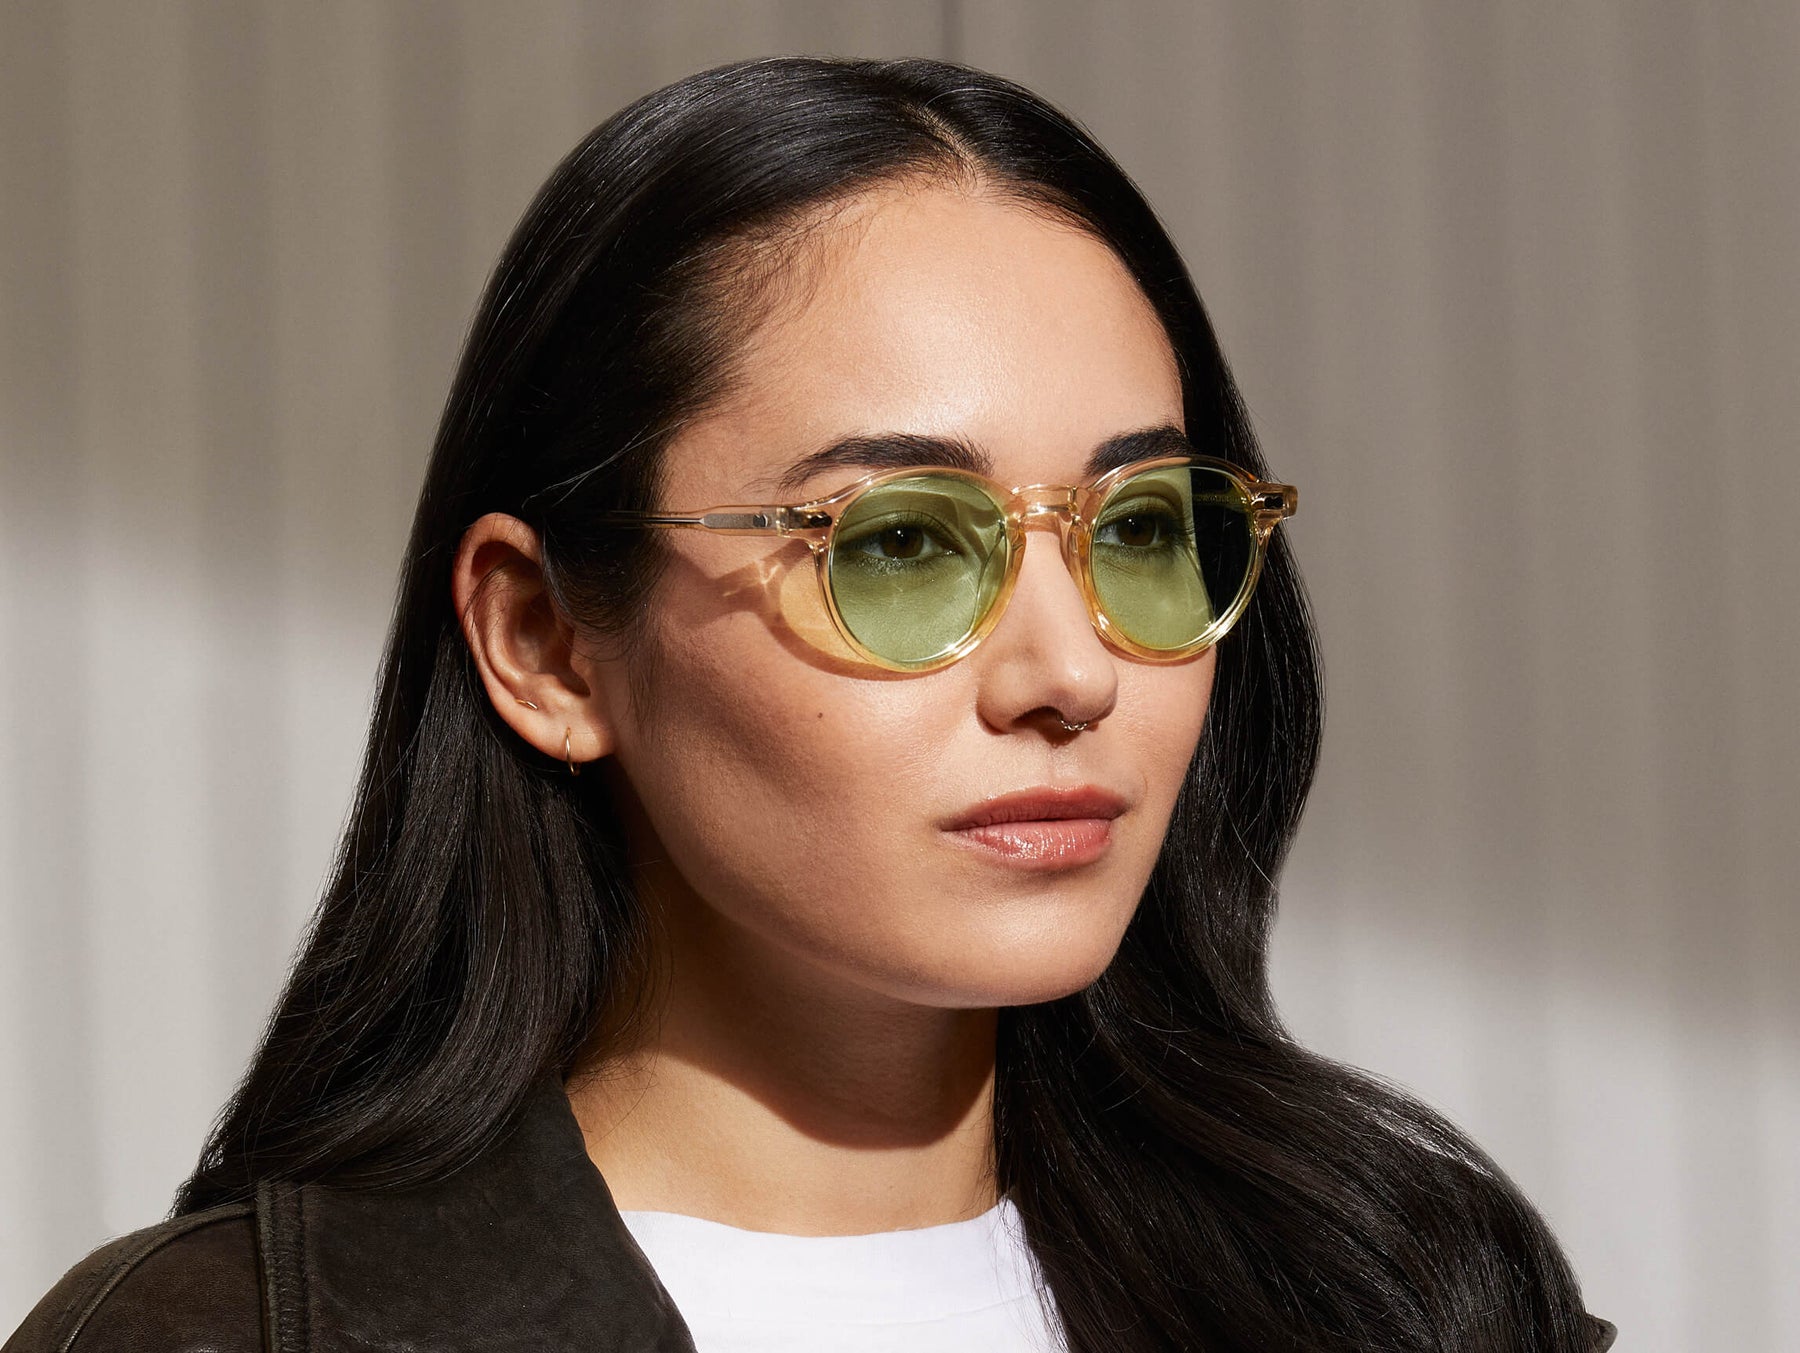 Model is wearing The MILTZEN in Flesh in size 46 with Limelight Tinted Lenses